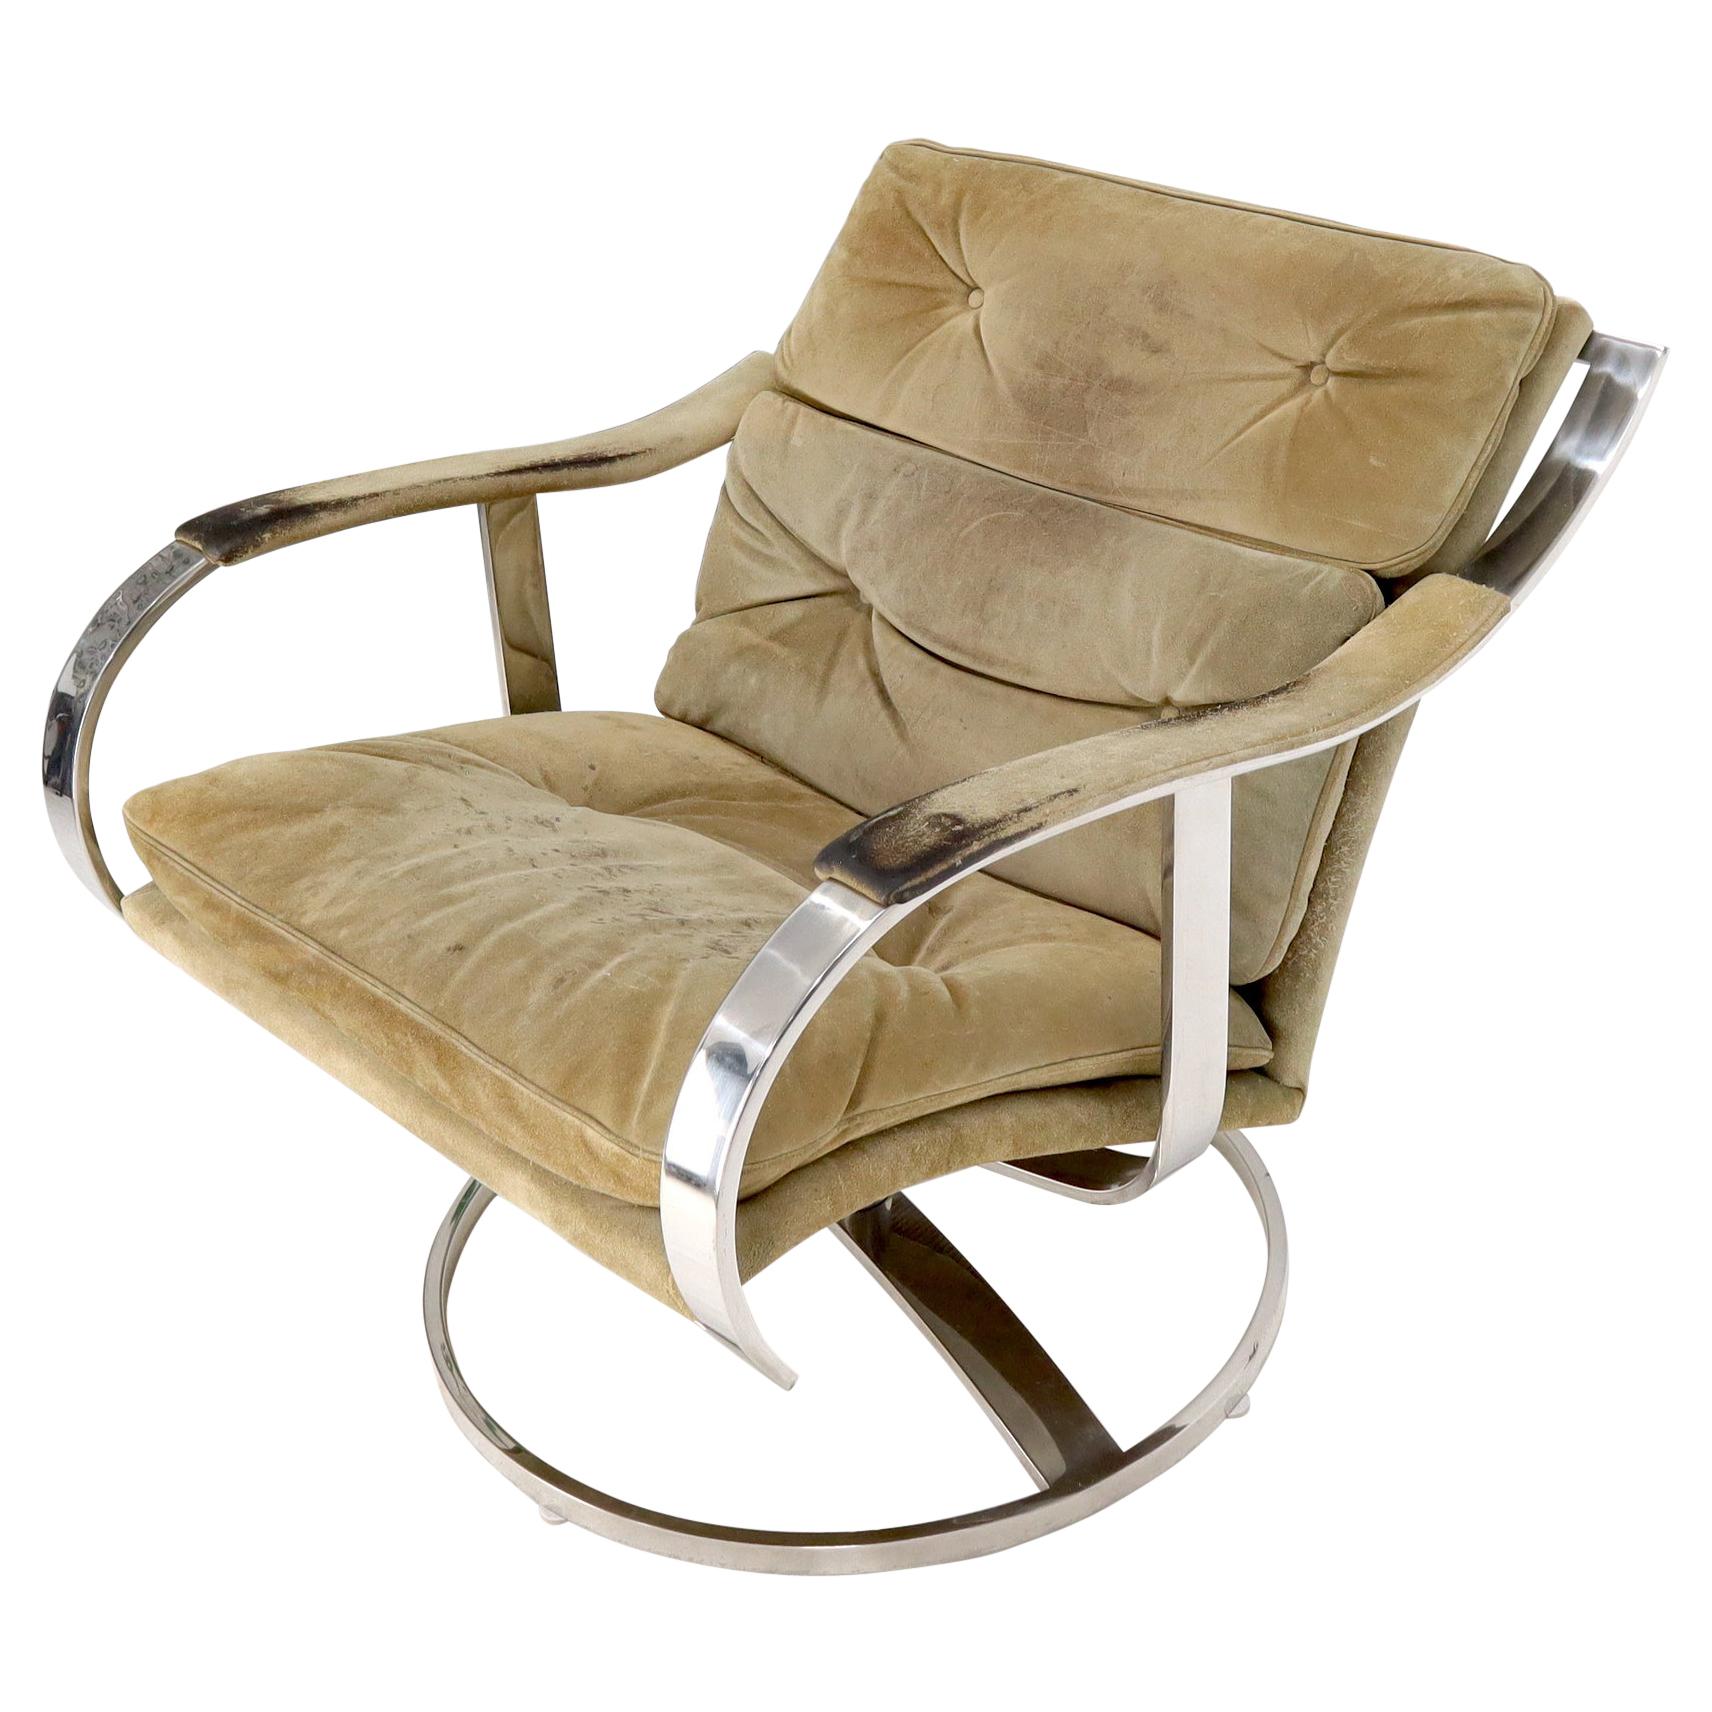 Heavy Gage Polished Stainless Steel Swivel Base Suede Upholstery Lounge Chair For Sale